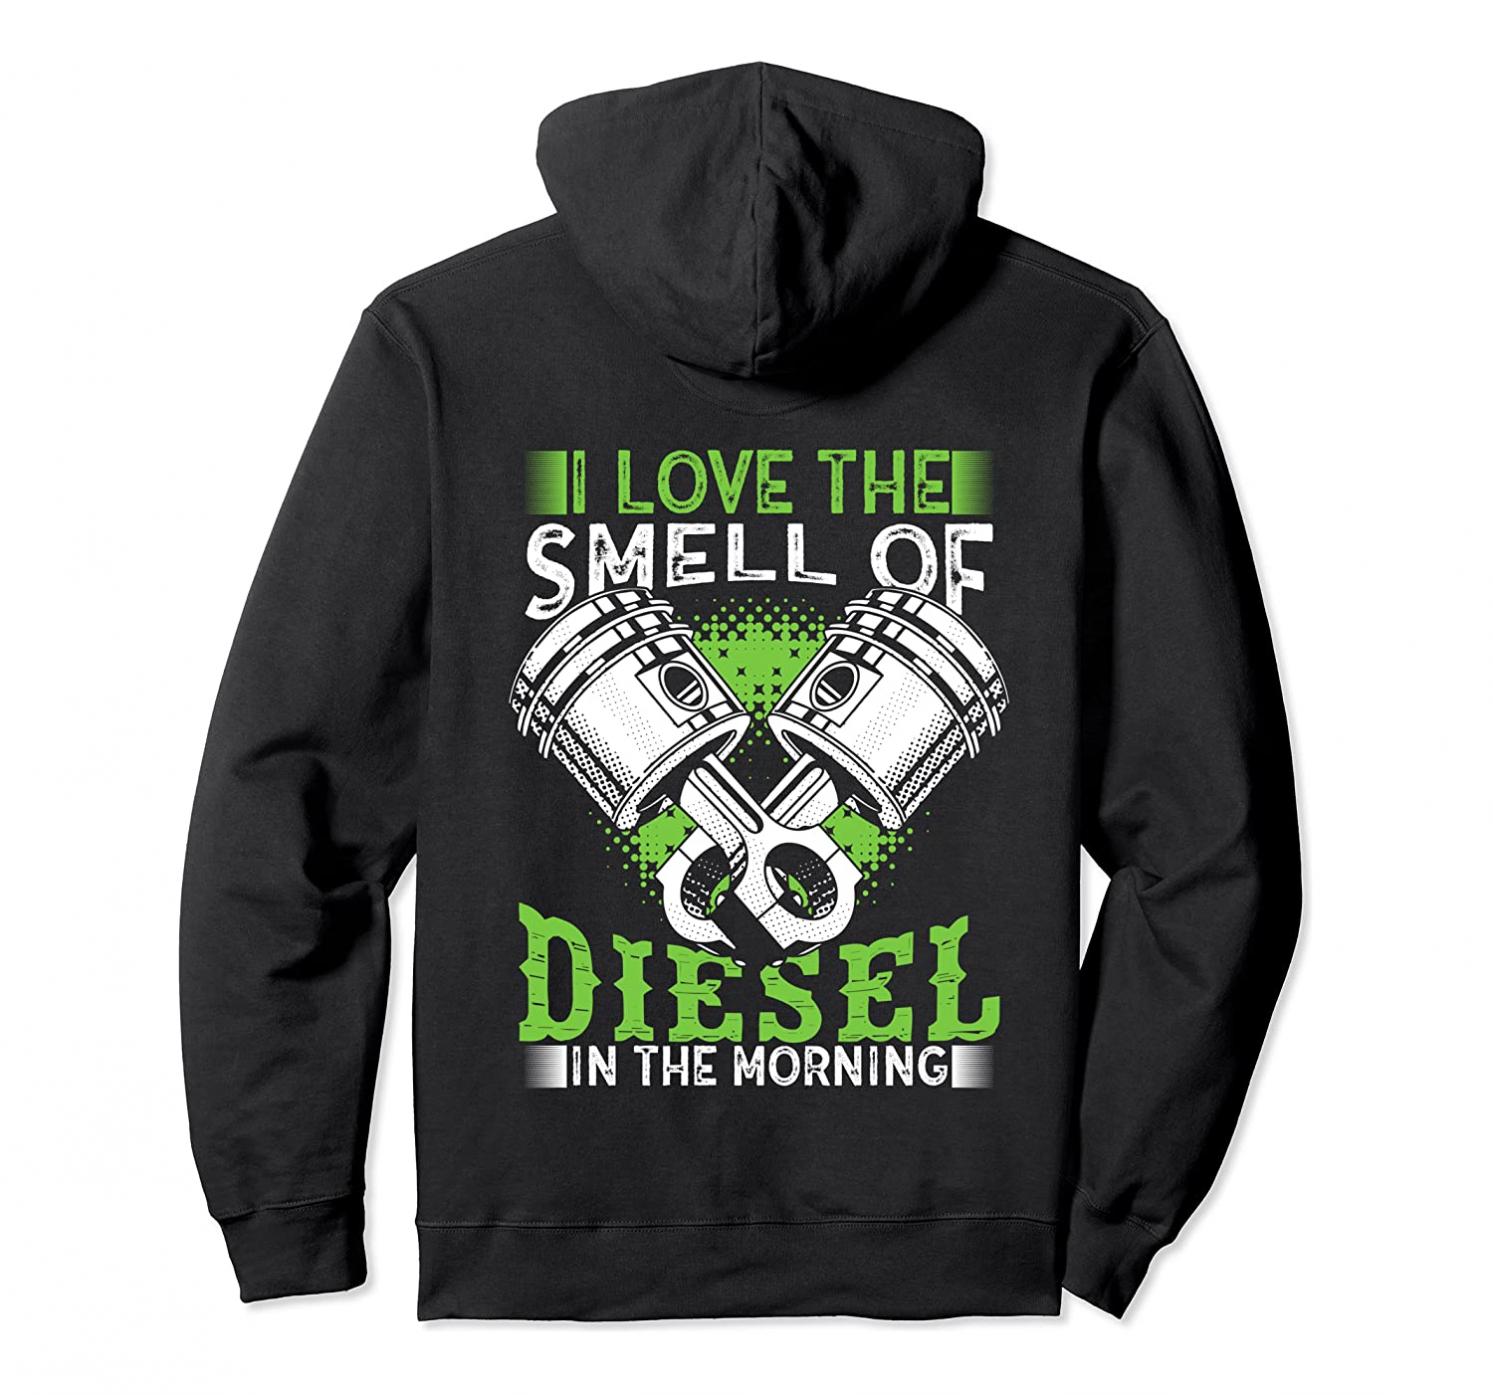 I Love the Smell of Diesel in the Morning Truck Driver Pullover Hoodie